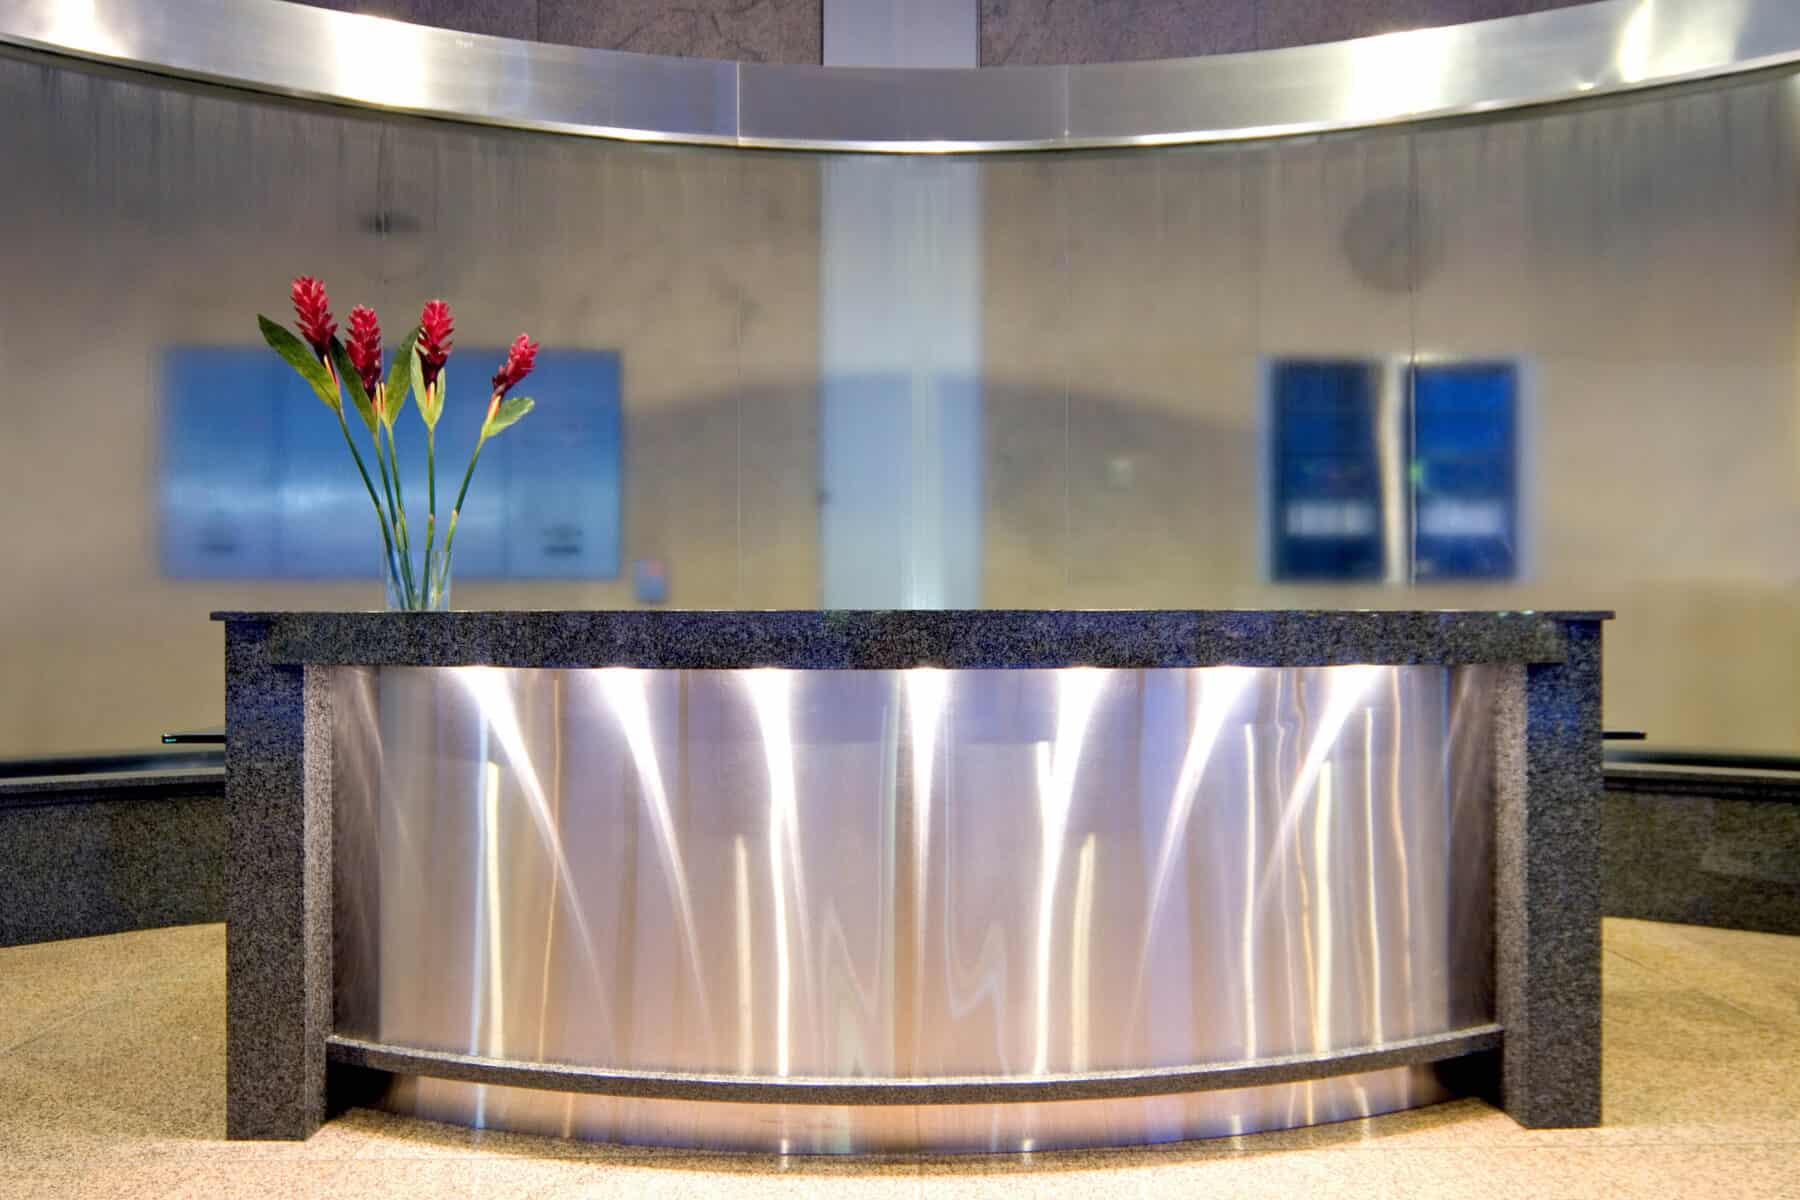 Stone and Metal Curved Reception Desk for Jackson Street Lobby by Commercial Builder & General Contractor Structural Enterprises